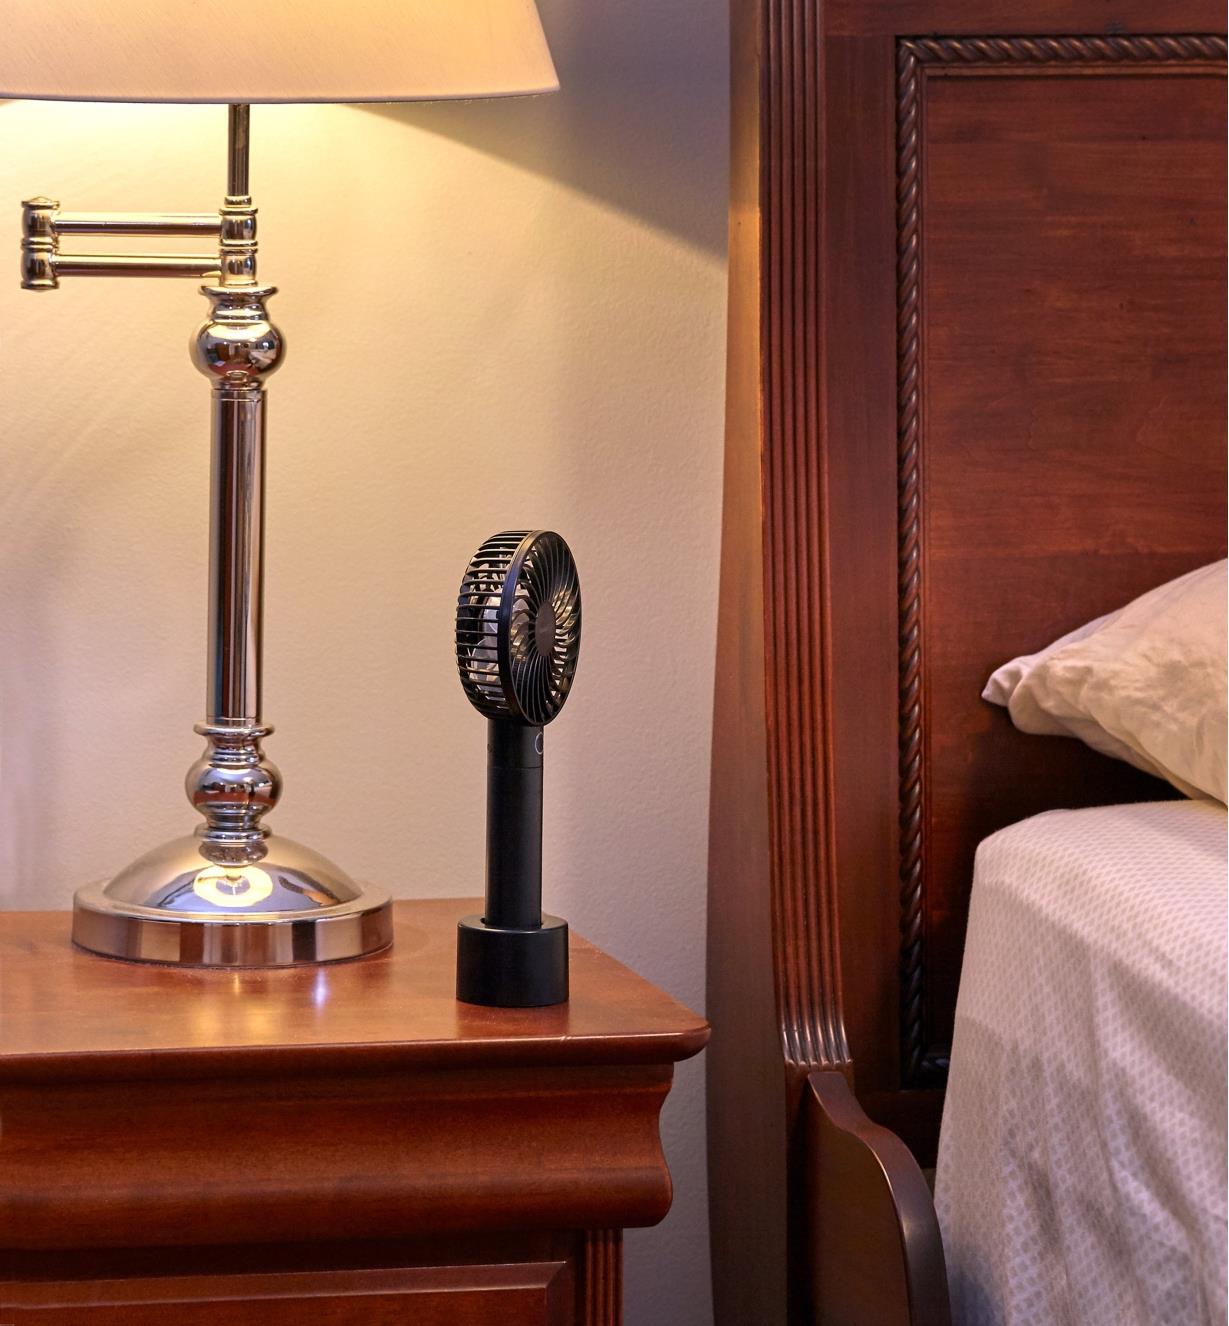 A rechargeable portable turbo fan standing on its non-slip base on a night table beside a bed